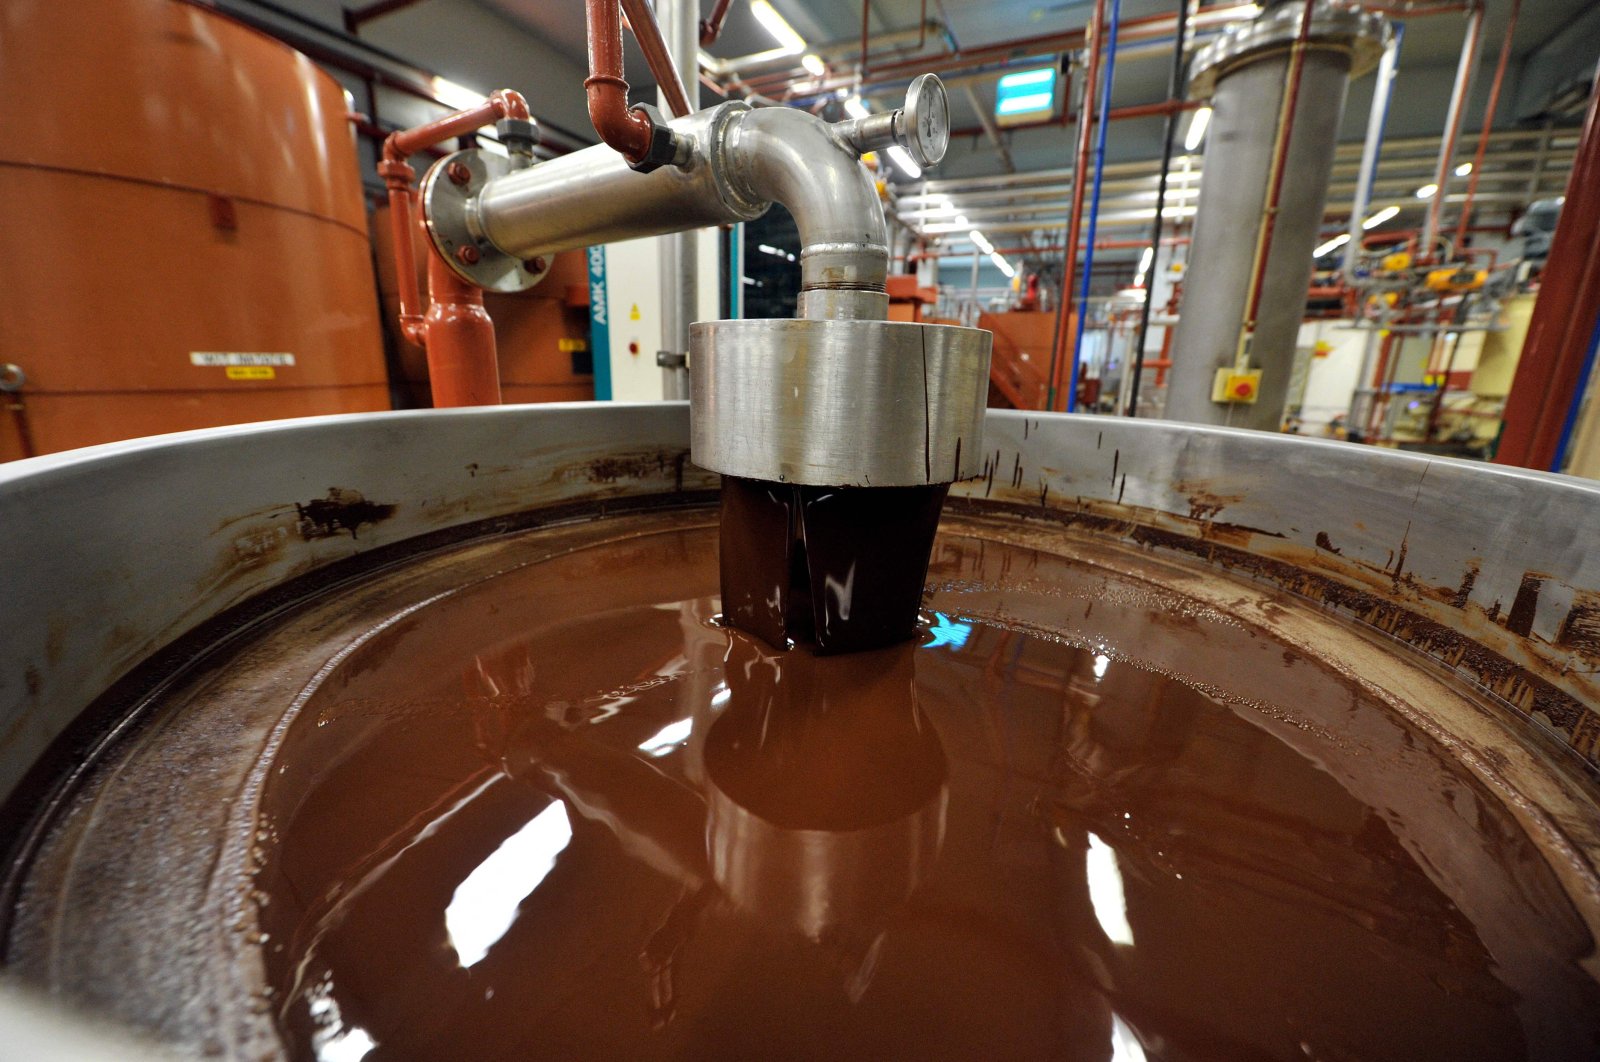 Hot chocolate before being moulded at the Barry Callebaut chocolate factory in Wieze, eastern Flanders, Belgium, July 8, 2013. (AFP Photo) 